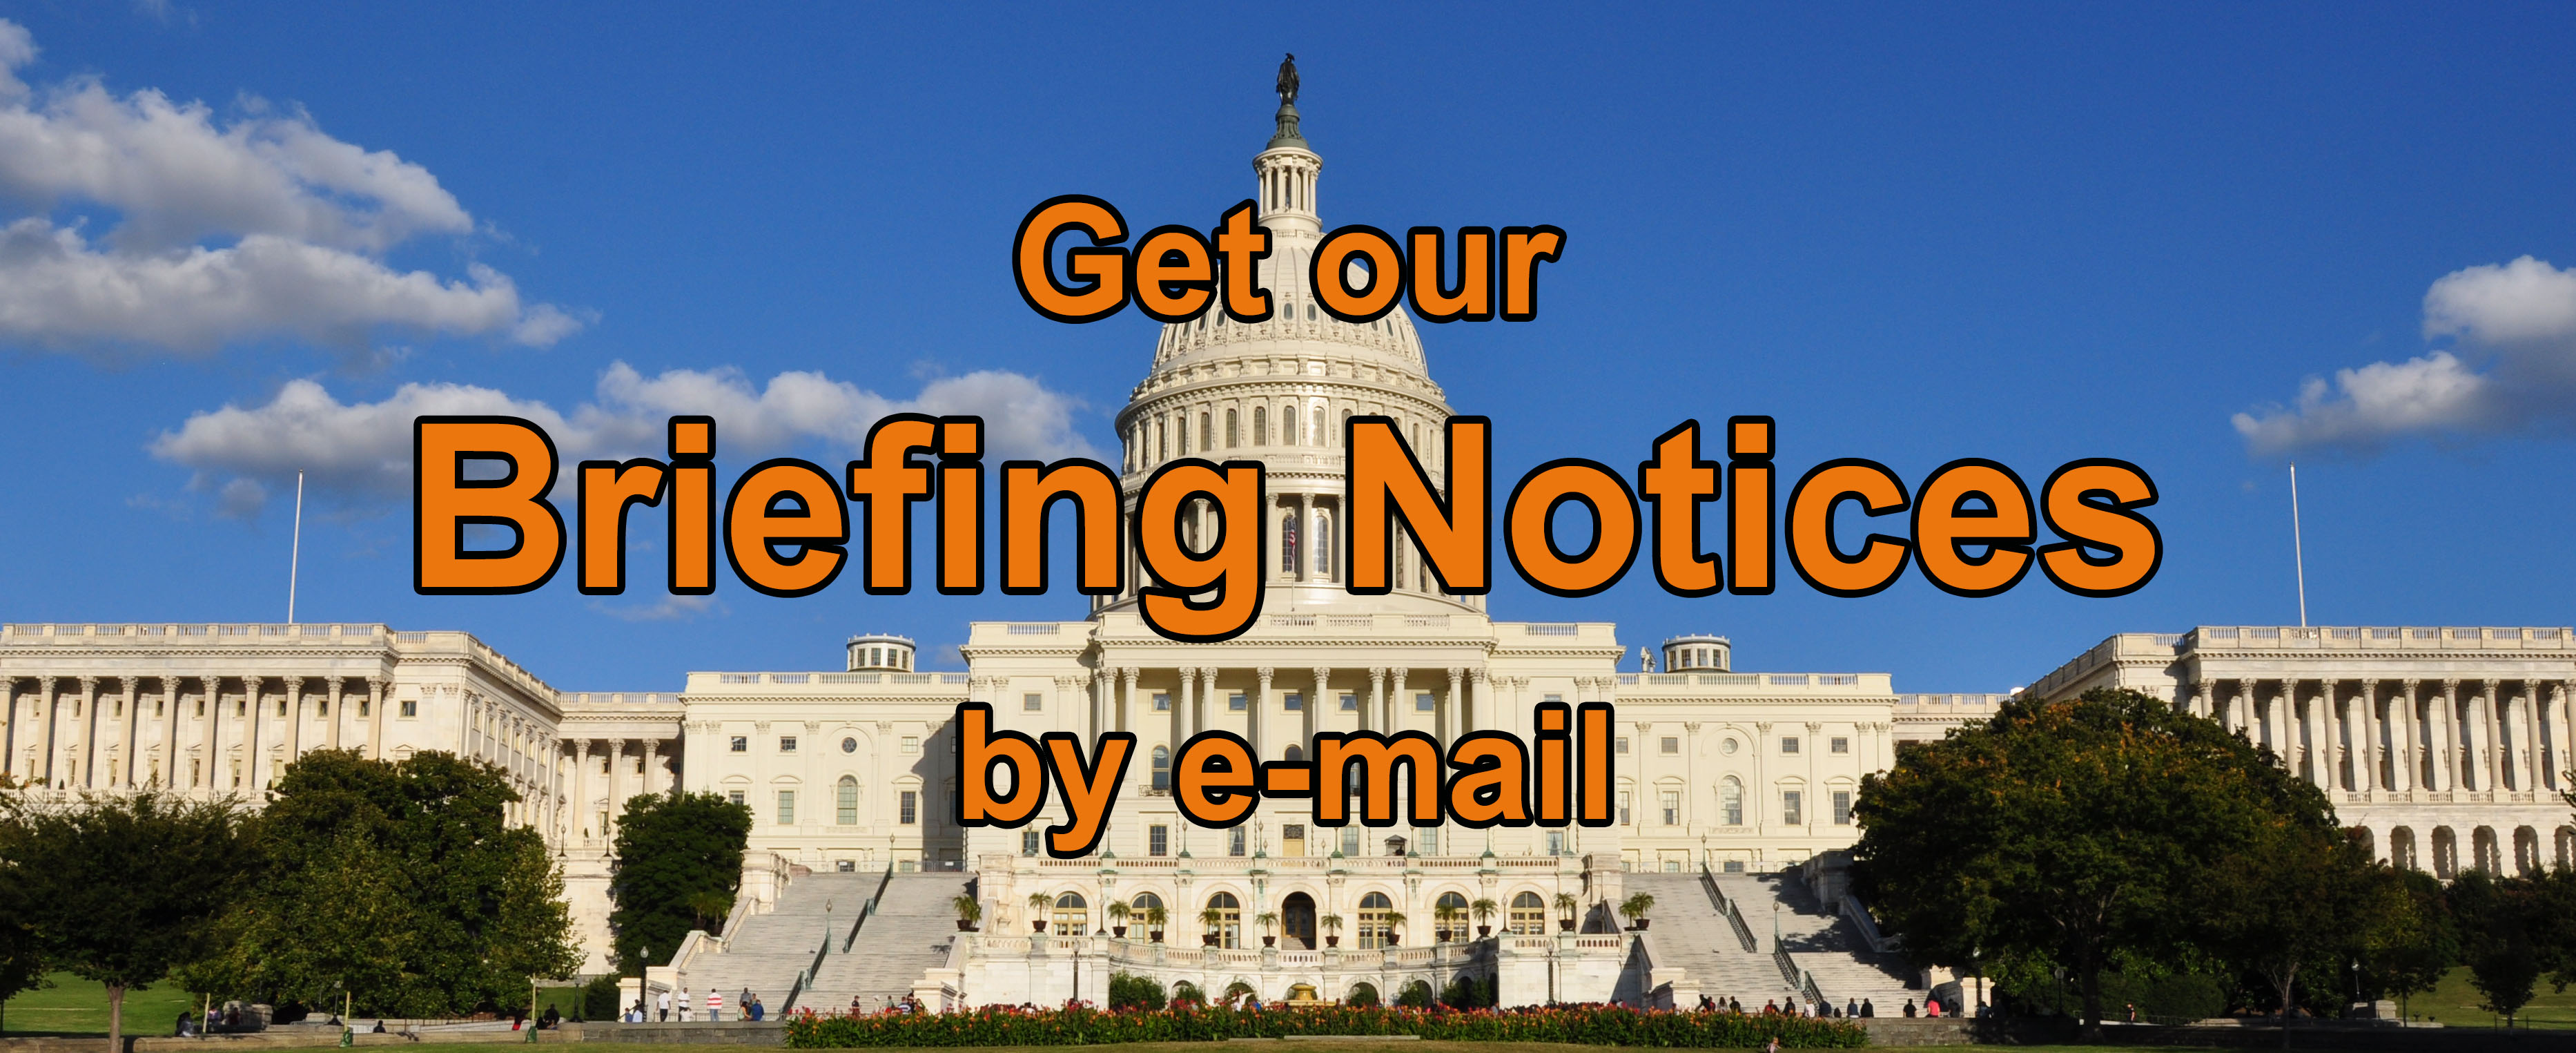 Subscribe to our briefing notices